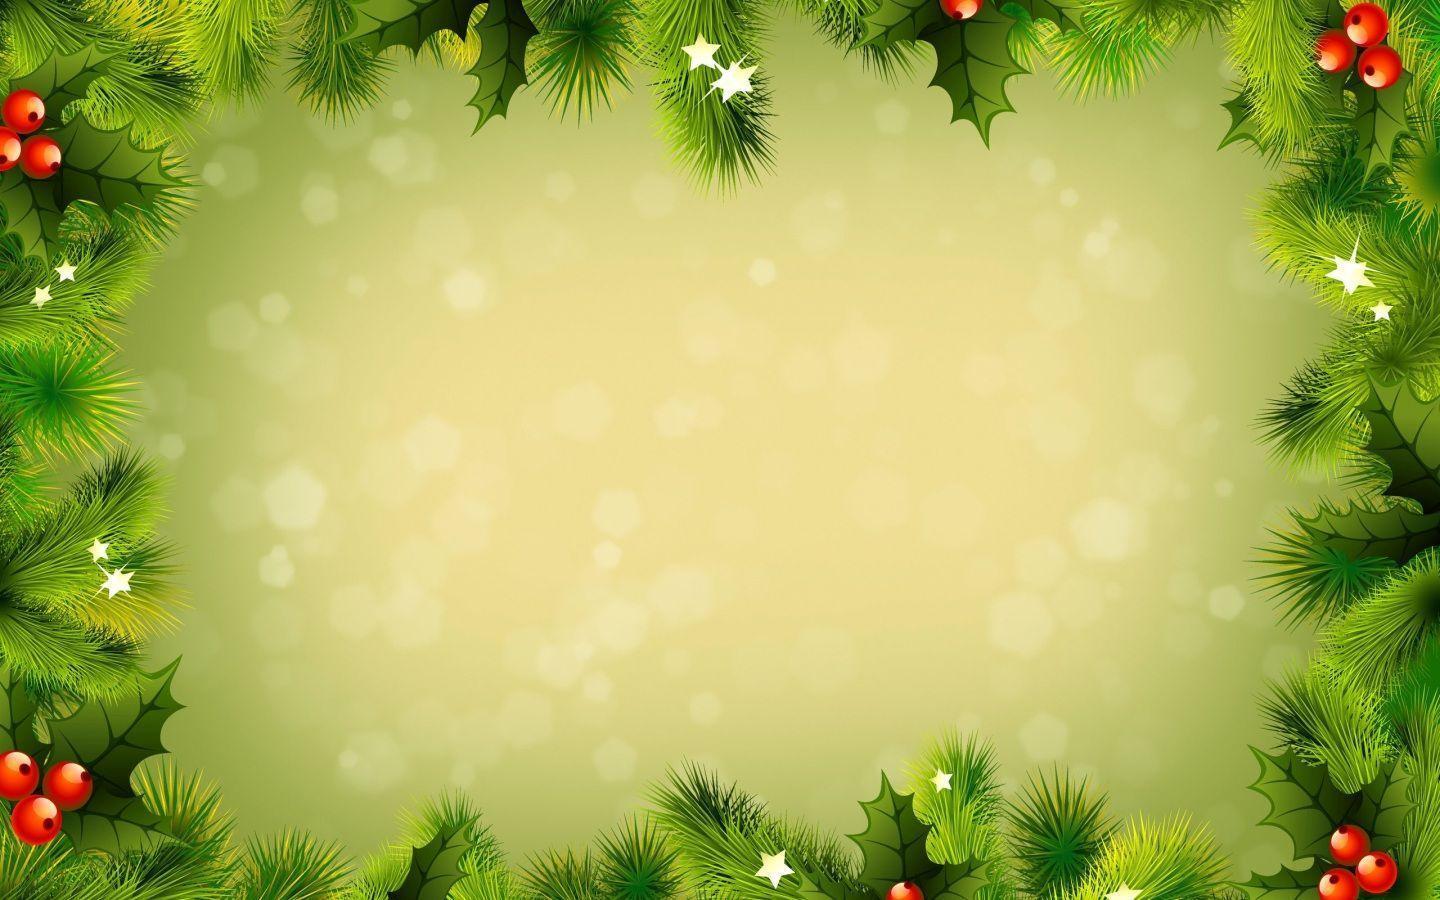 Xmas Stuff For > Green Christmas Background